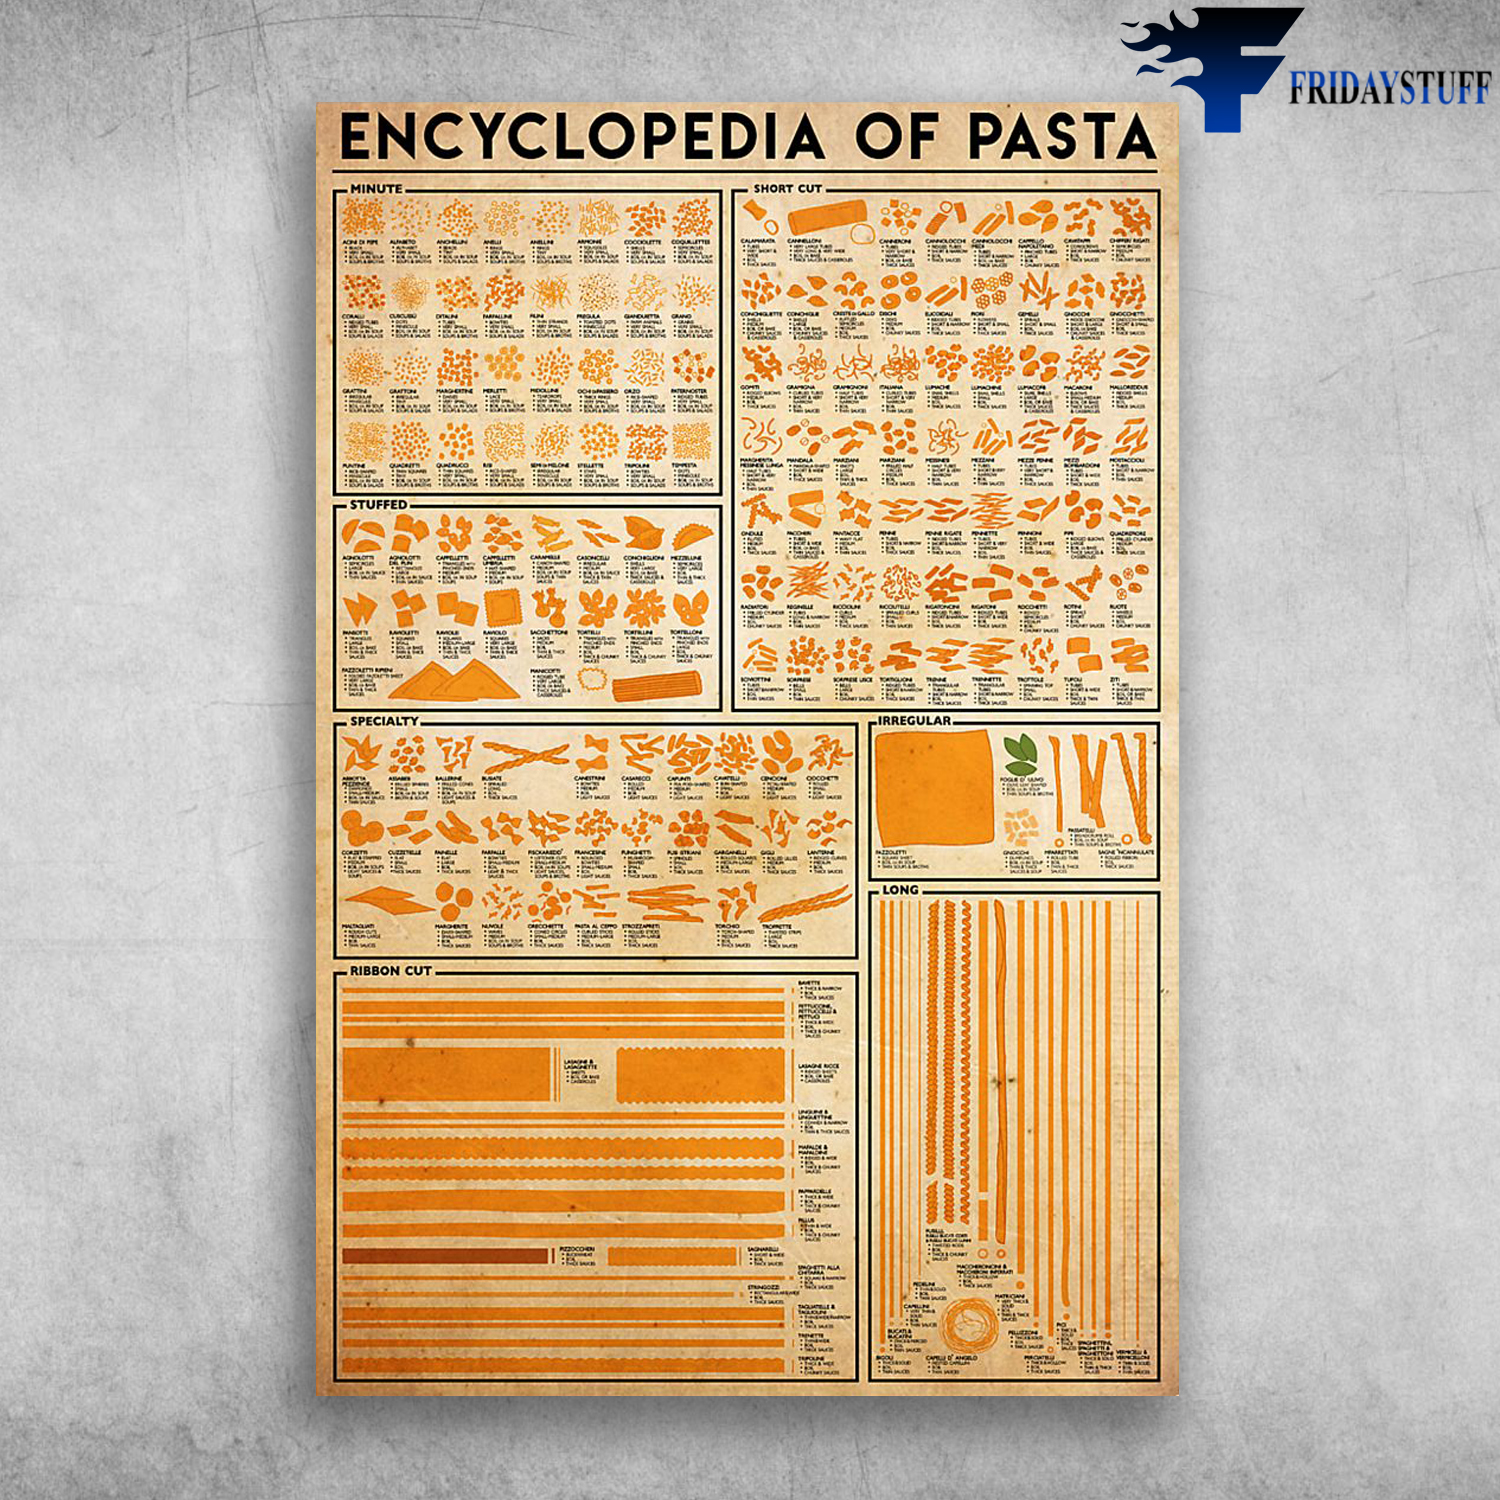 Encyclopedia Of Pasta The Awesome Chef Specialty Ribbon Cut Pasta